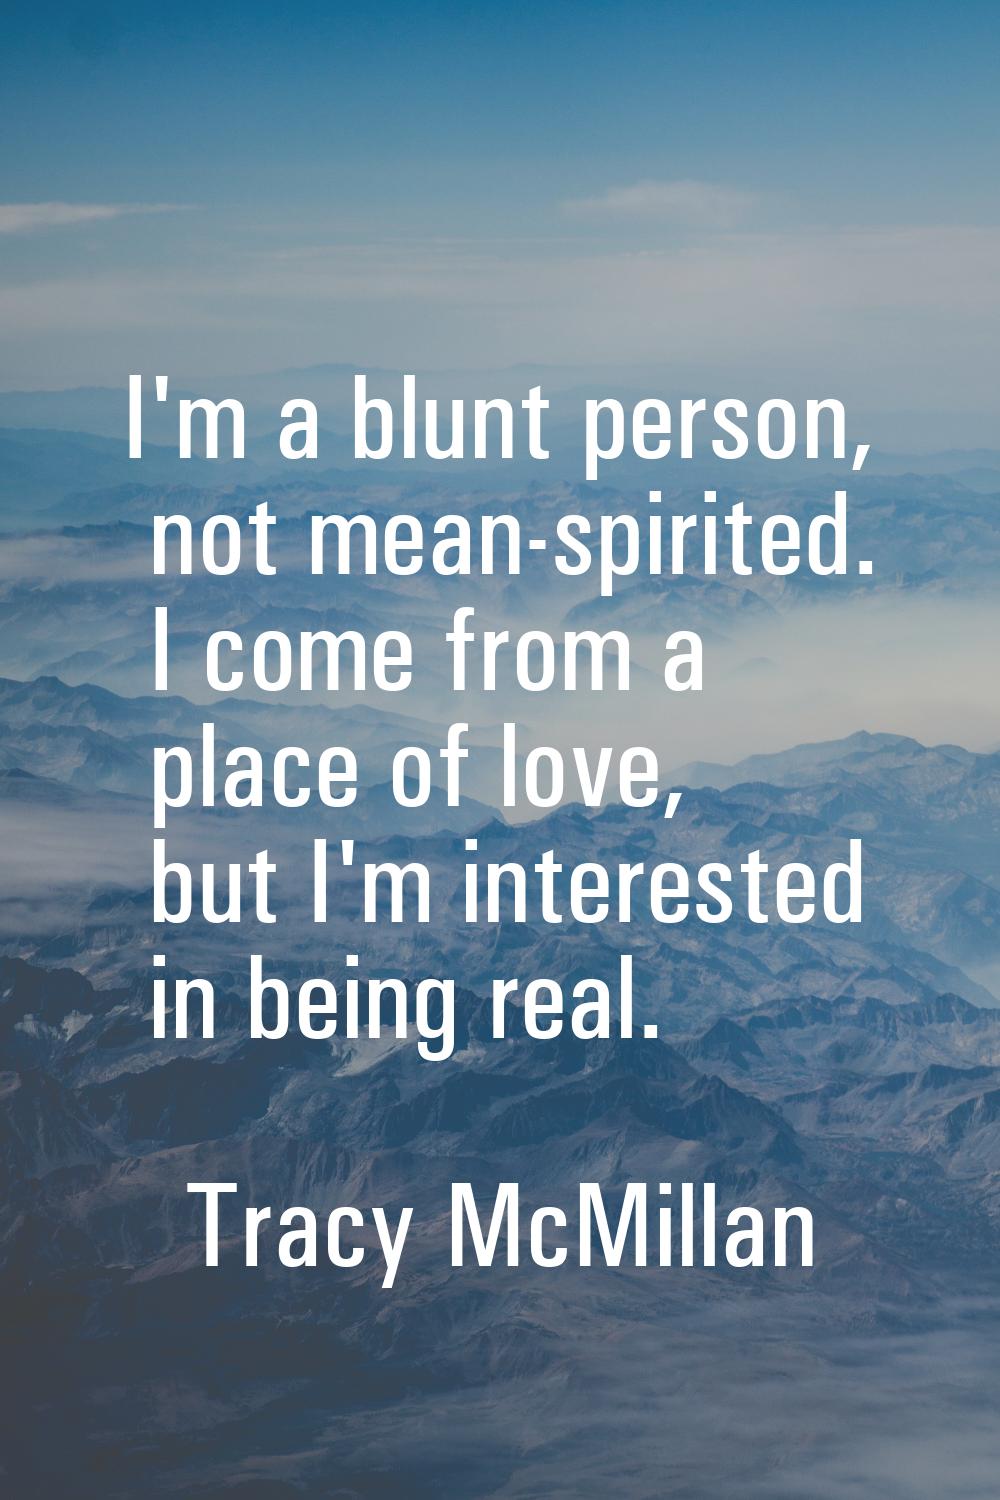 I'm a blunt person, not mean-spirited. I come from a place of love, but I'm interested in being rea